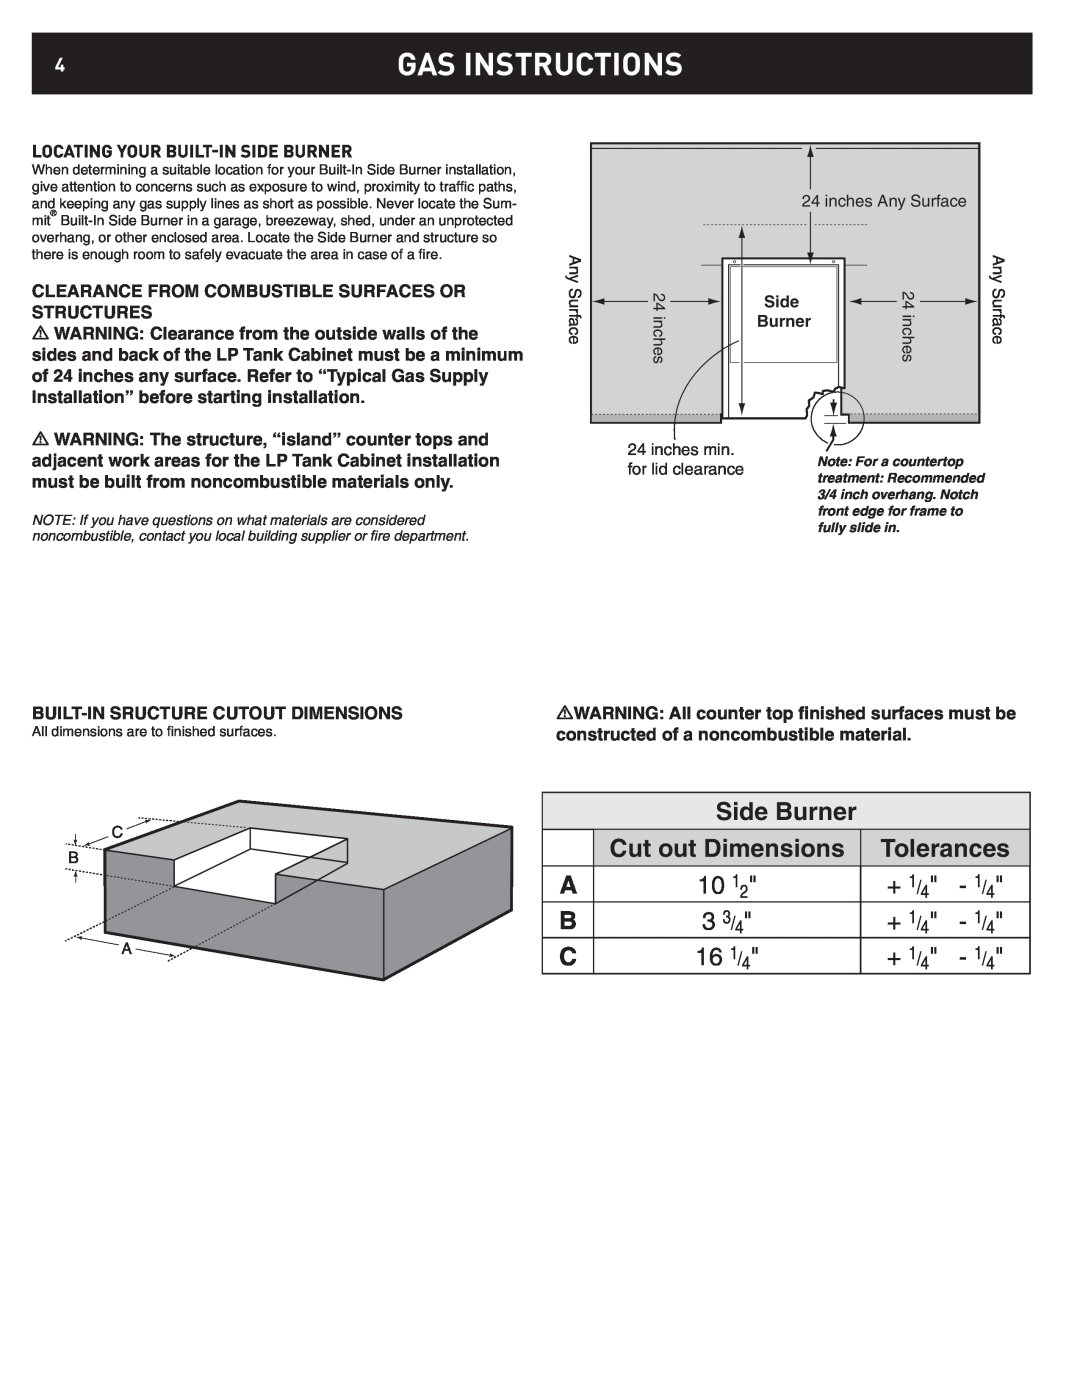 Weber 42376 Gas Instructions, Locating Your Built-Inside Burner, Any Surface, inches, Side Burner, Cut out Dimensions 